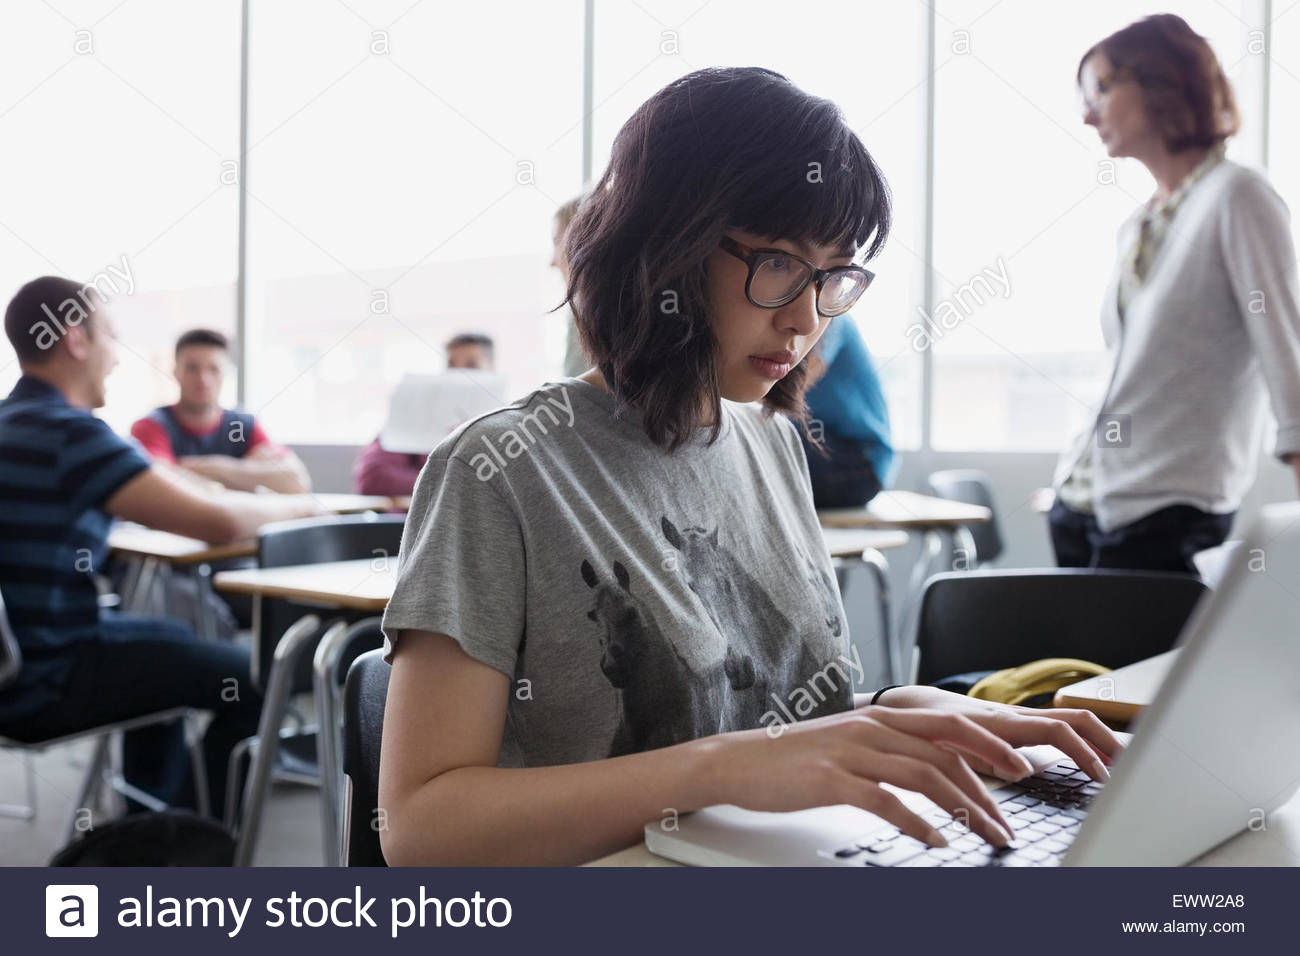 College student typing at laptop in classroom Stock Photo